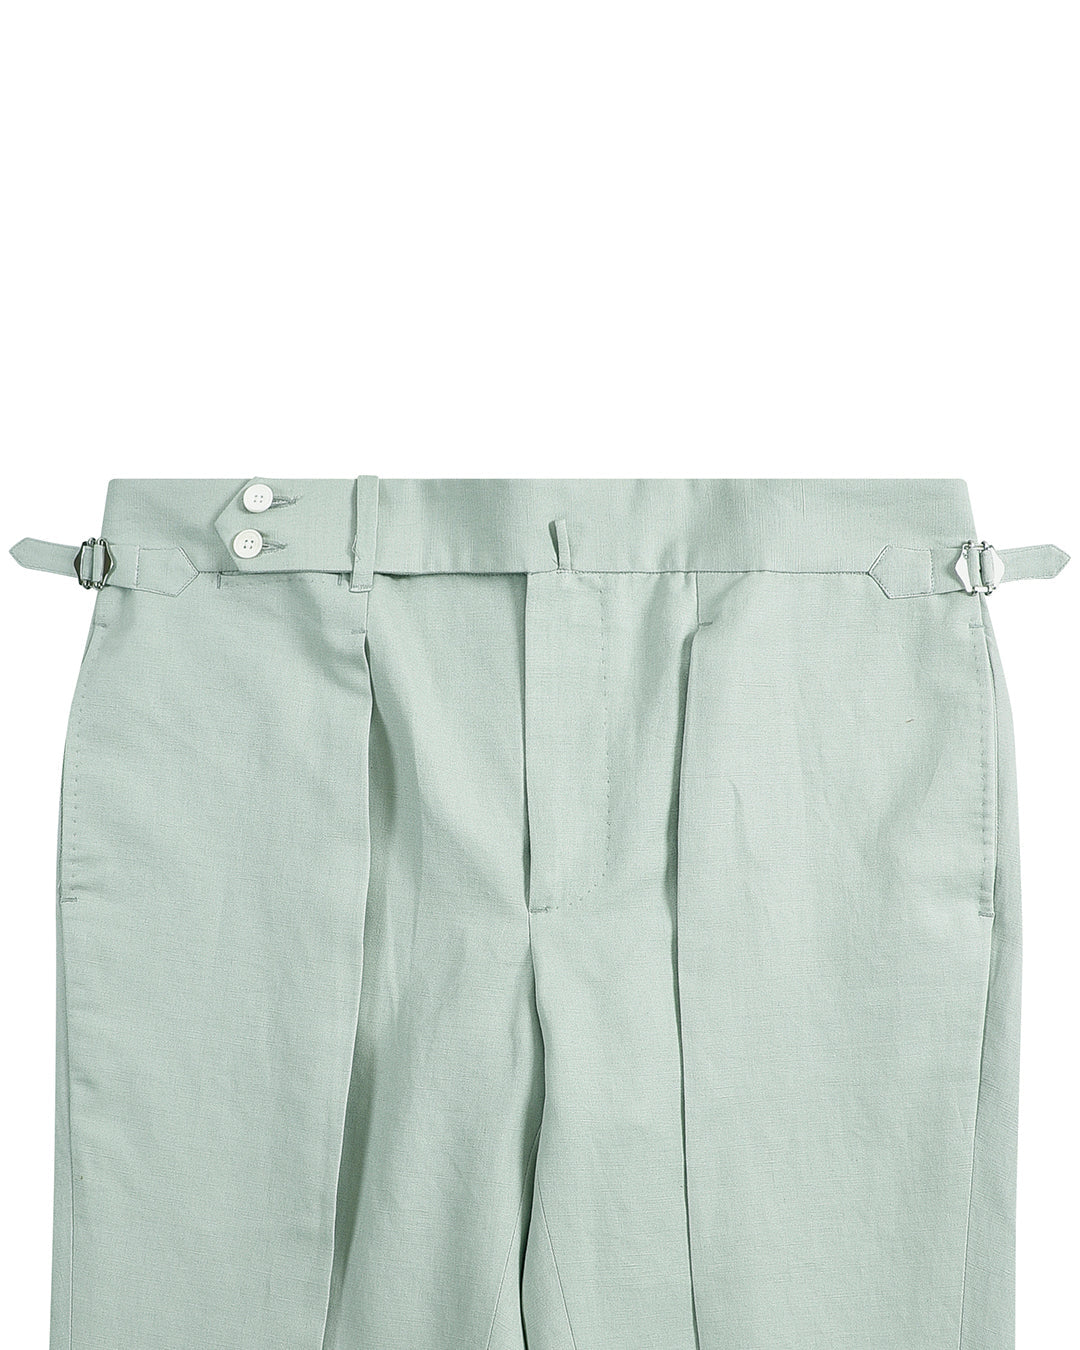 Front view of custom linen canvas pants for men by Luxire in pale green